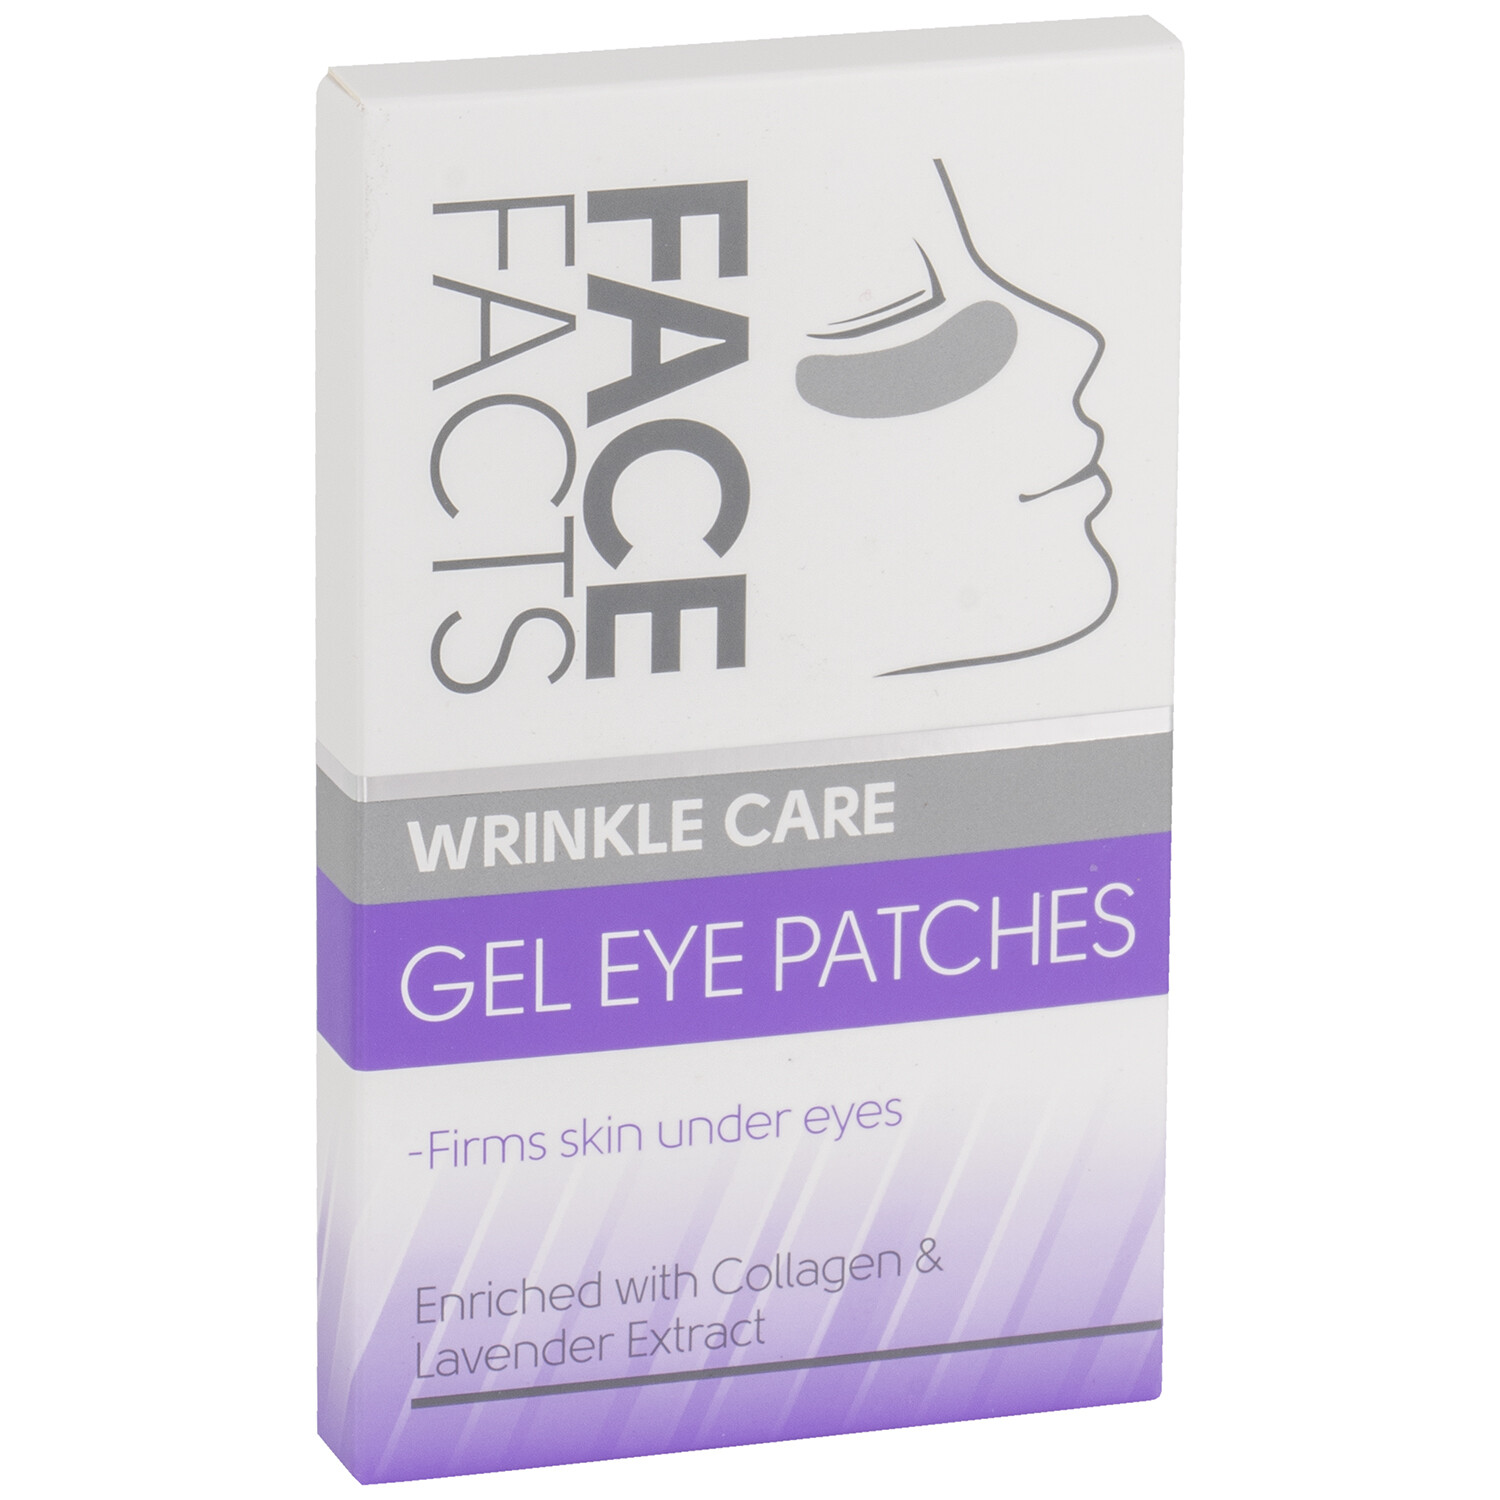 Face Facts Wrinkle Care Gel Eye Patches Image